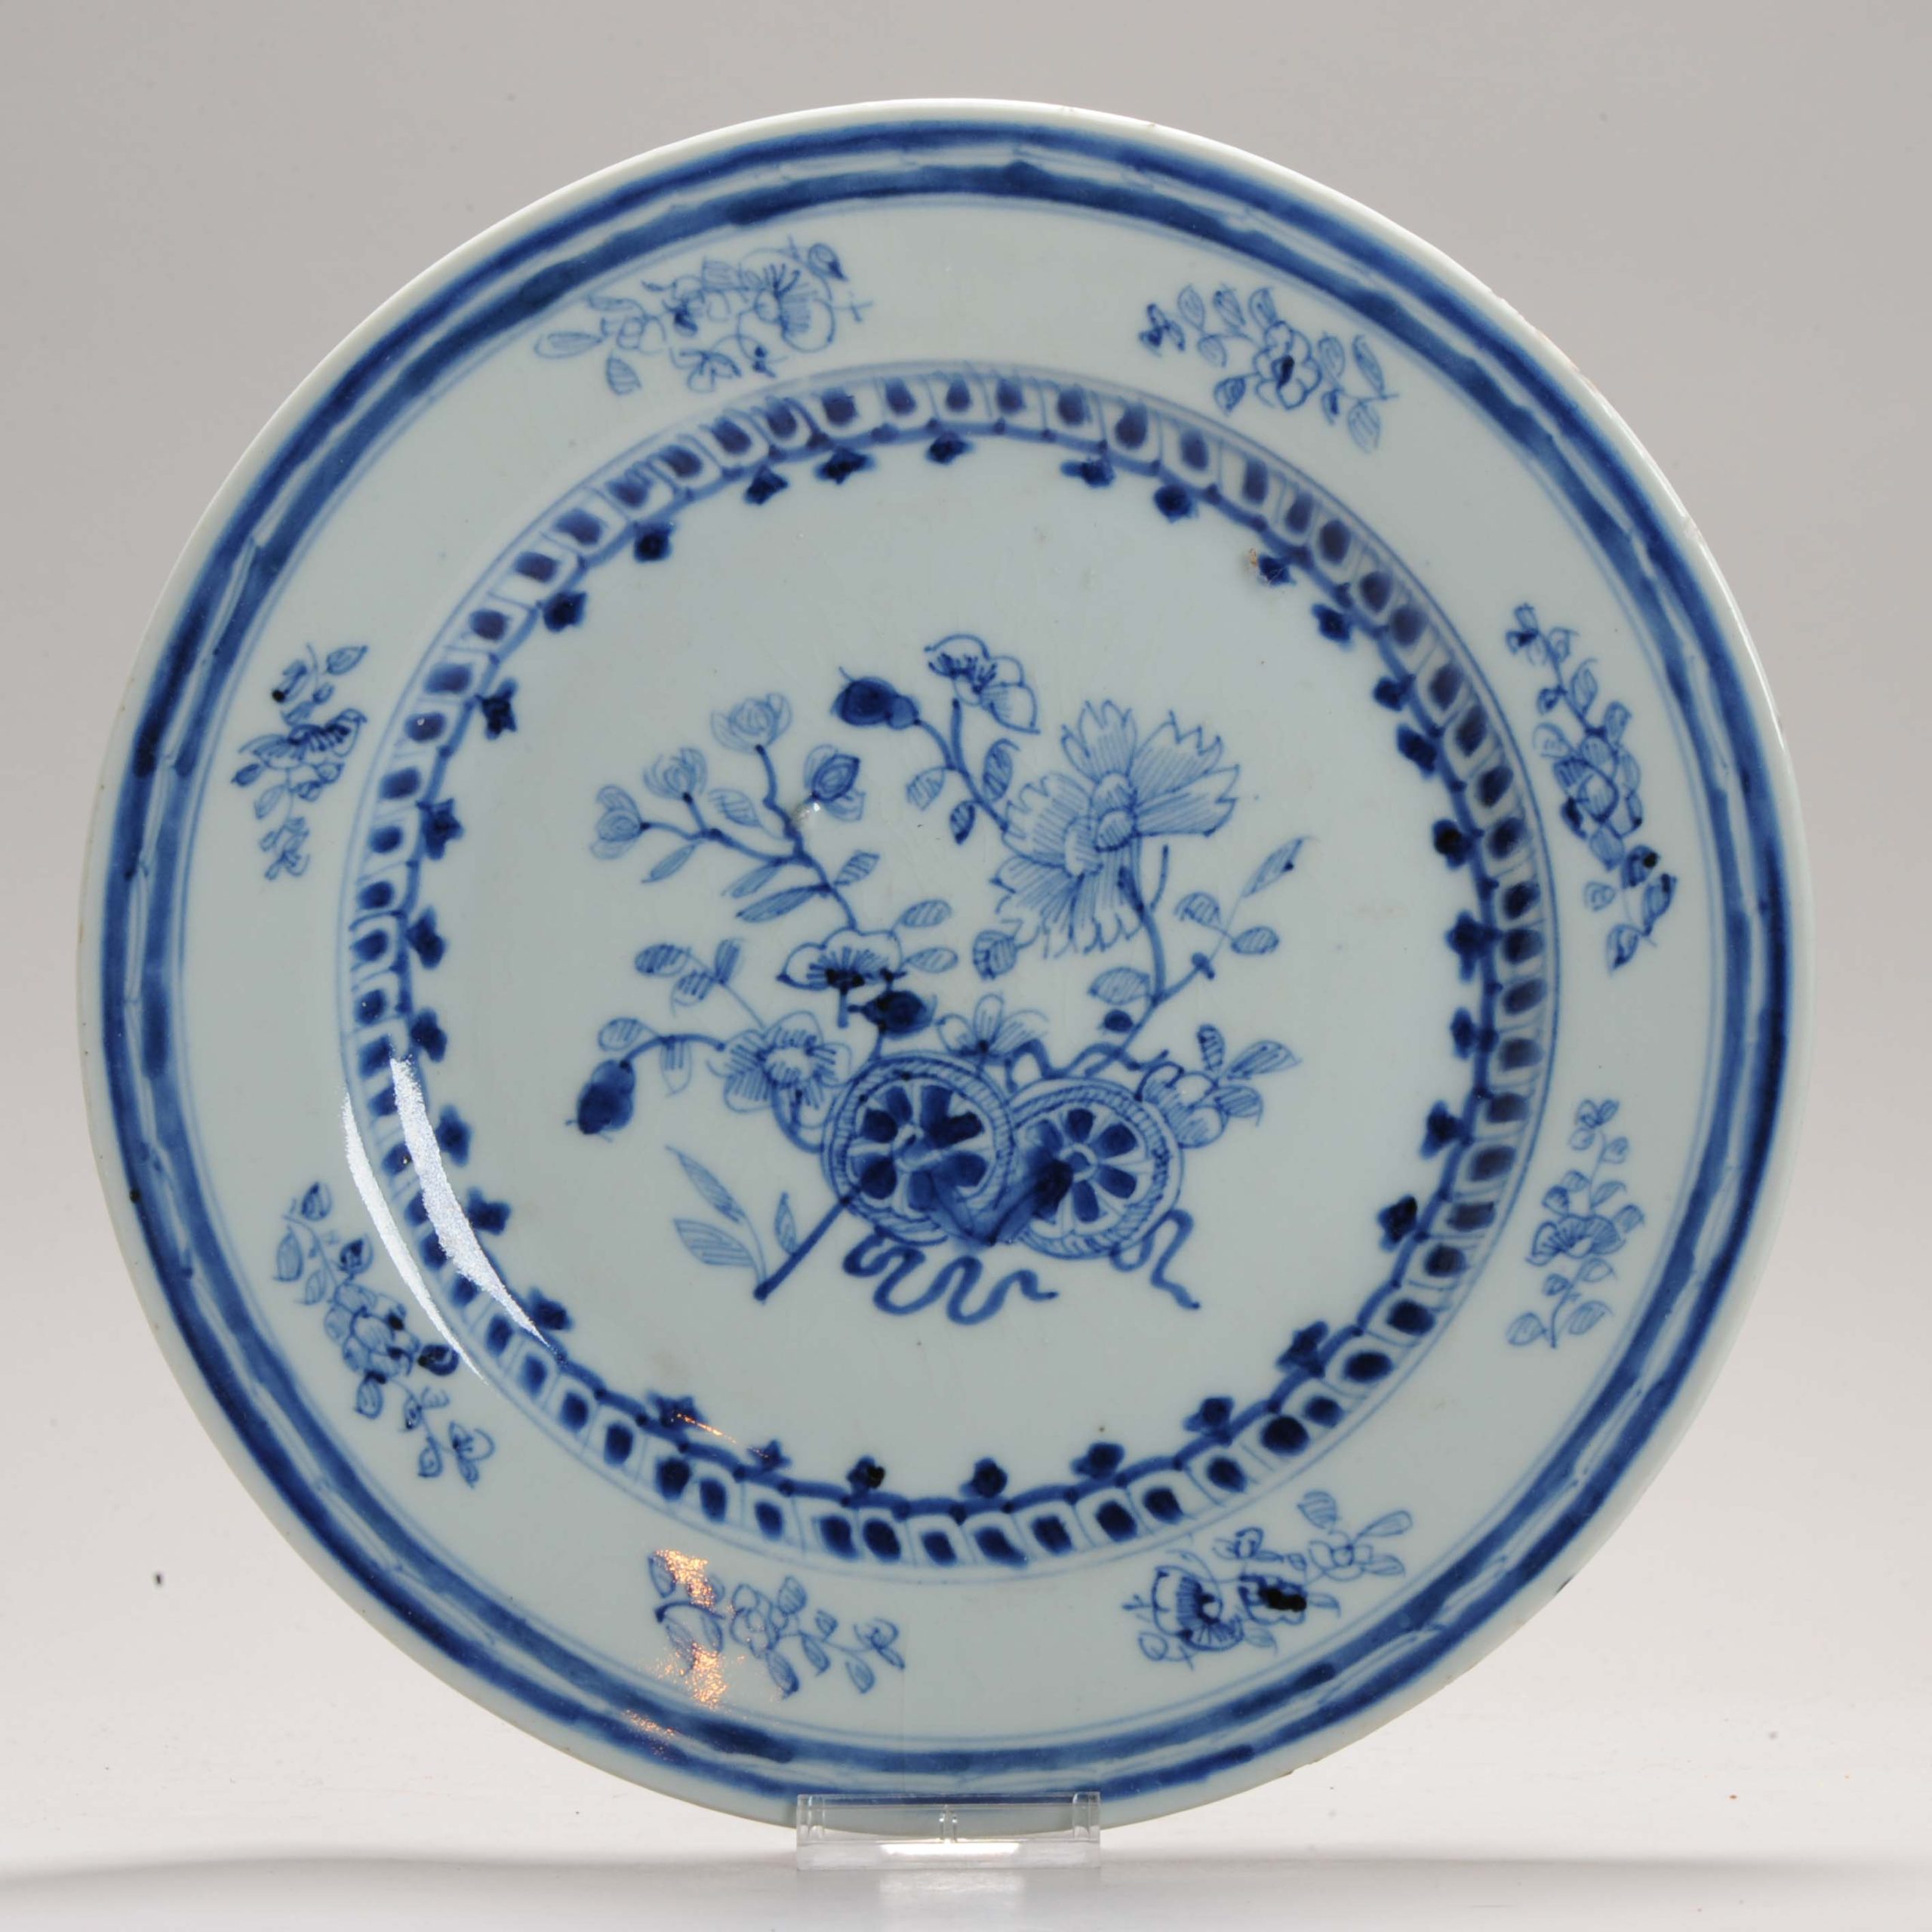 Antique Plate 18th Century Chinese Porcelain Blue and White Plate Qianlong Period